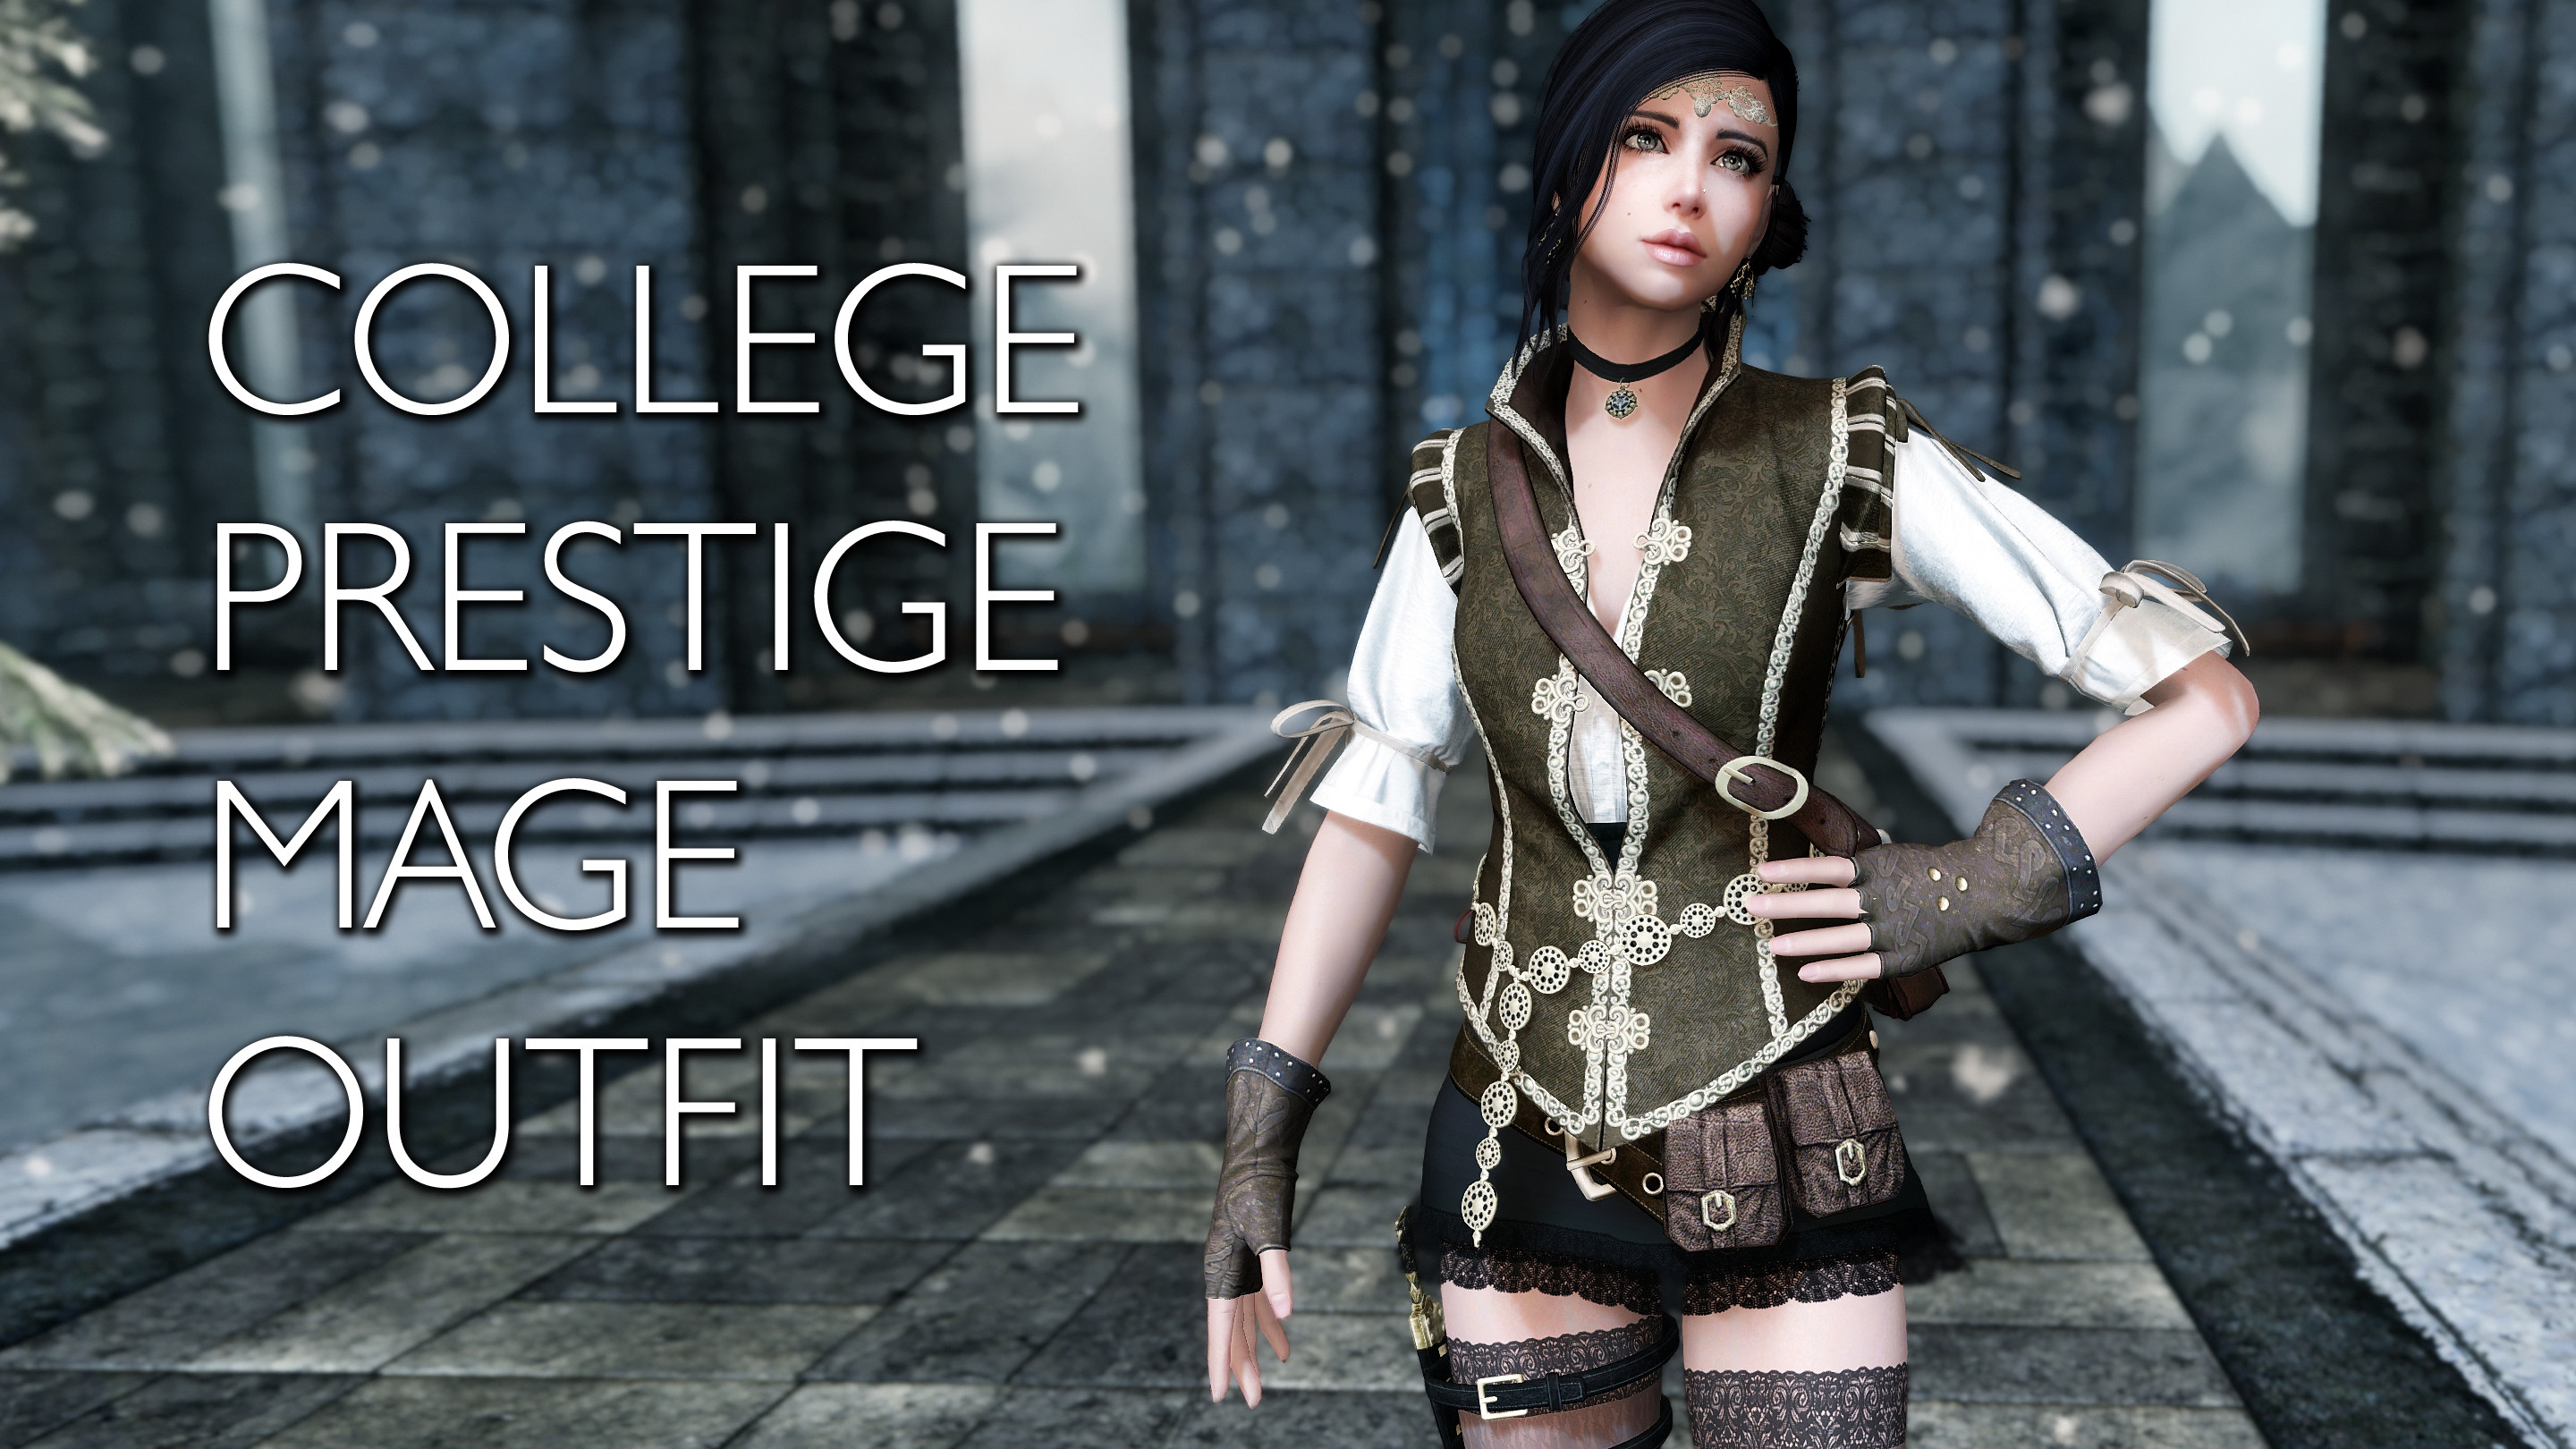 College Prestige Mage Outfit